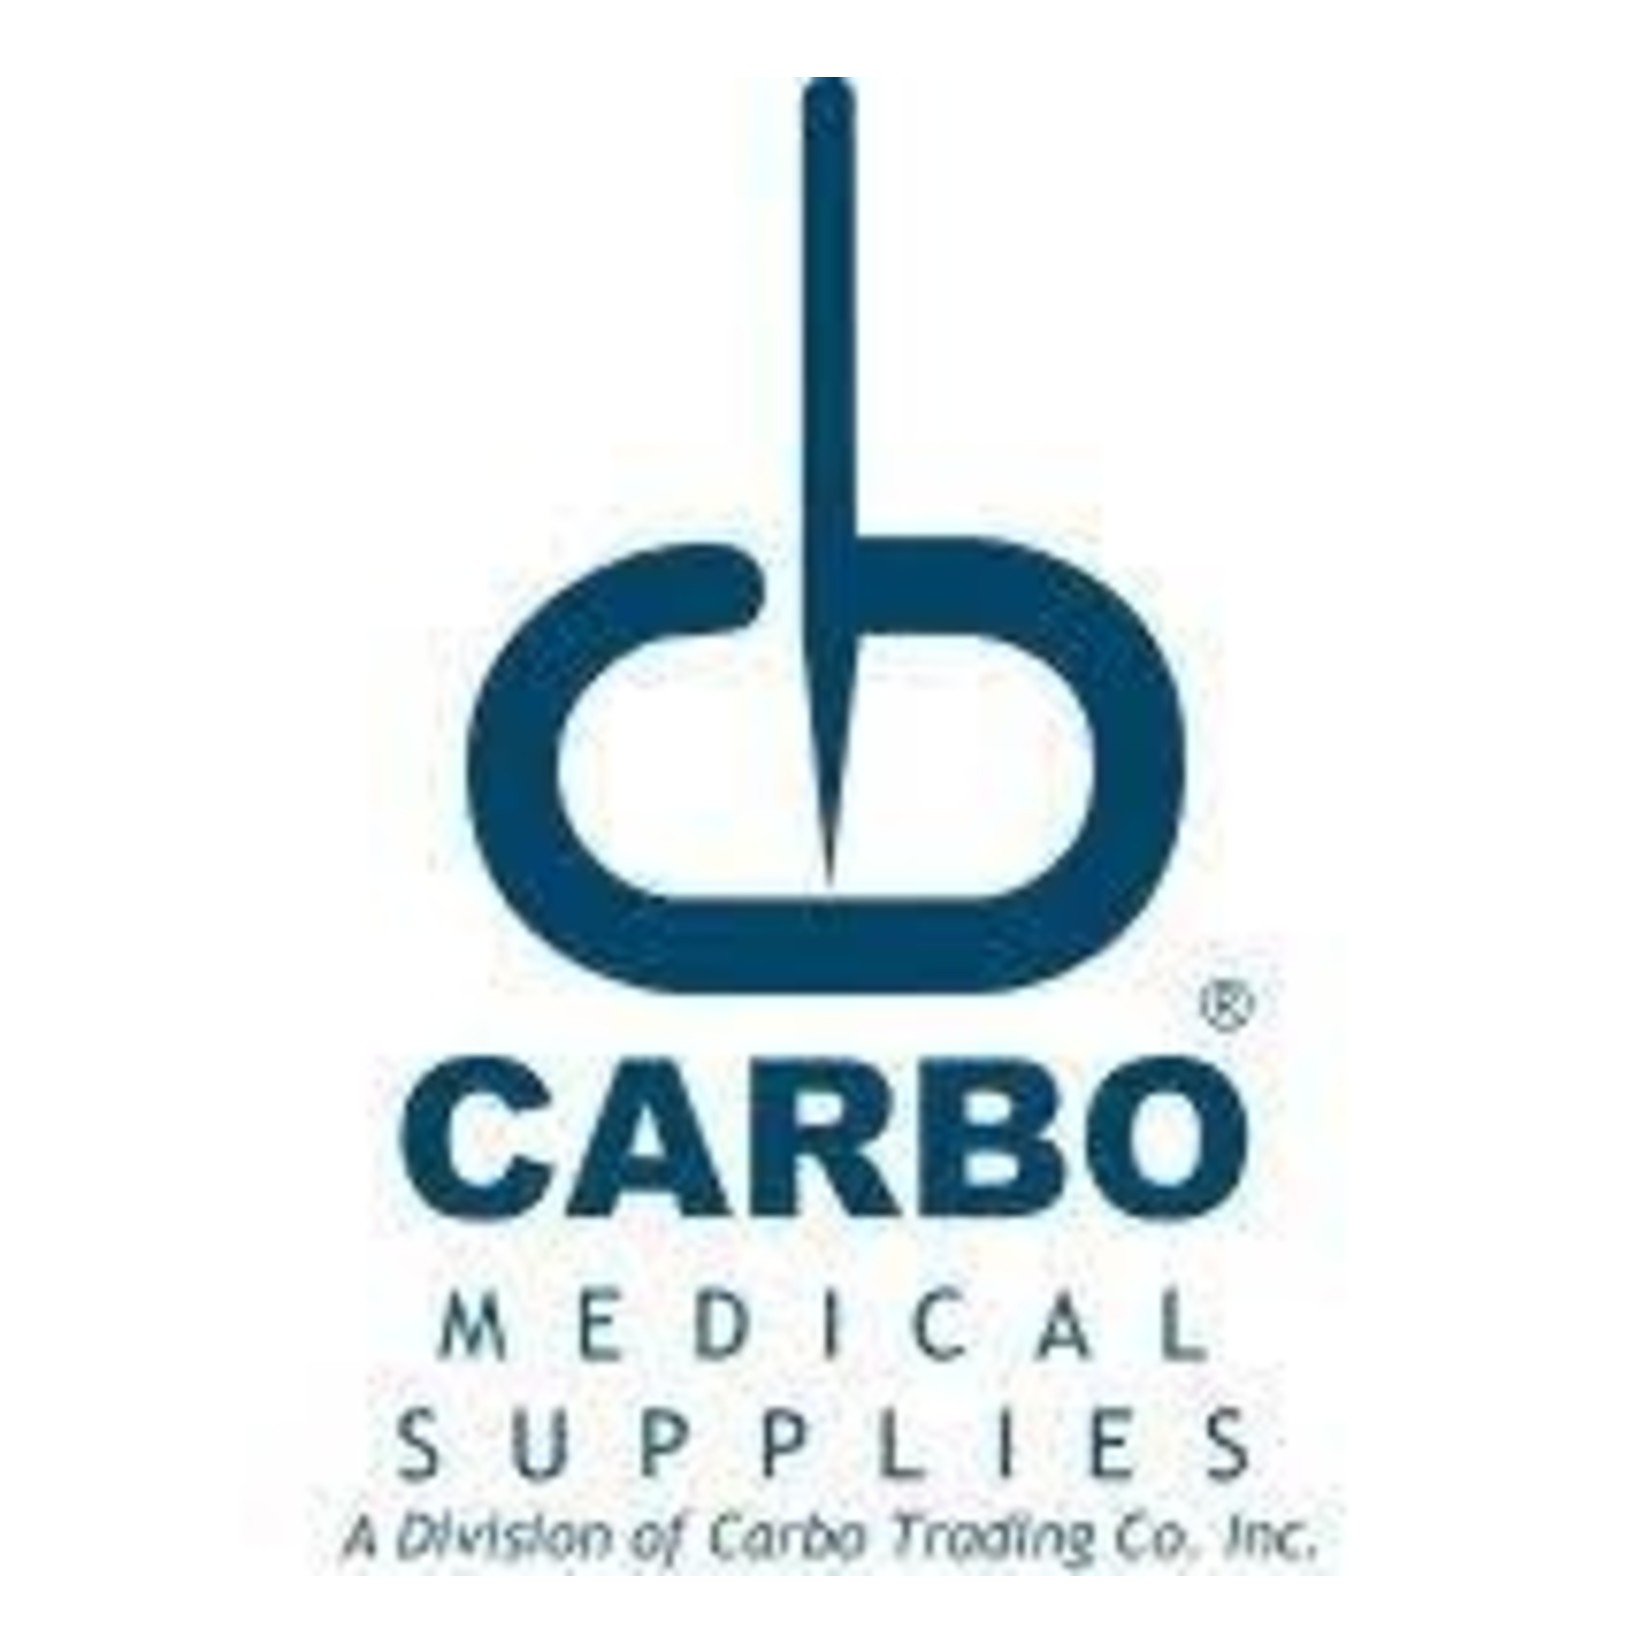 CARBO CARBO ACUPUNCTURE NEEDLE .25 x 13mm 100 PACK